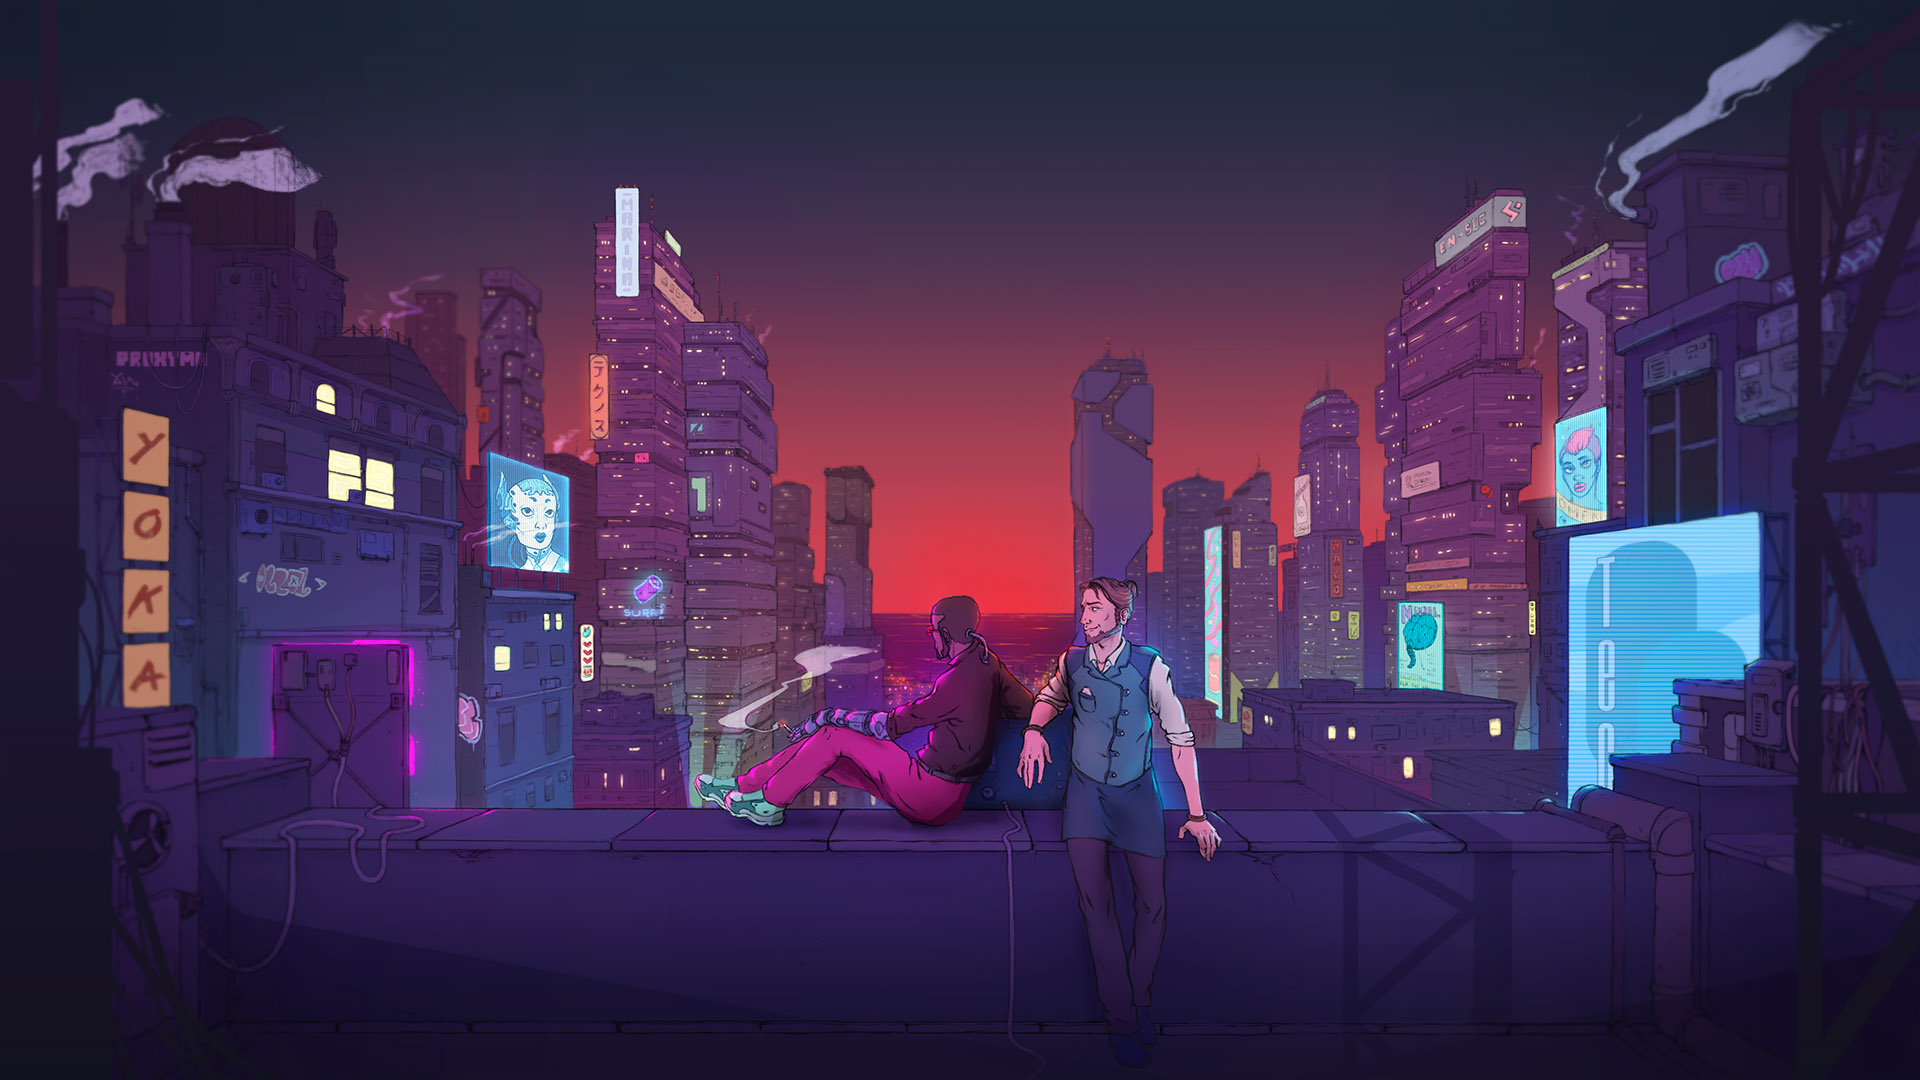 Two men relax on a rooftop overlooking a cyberpunk city